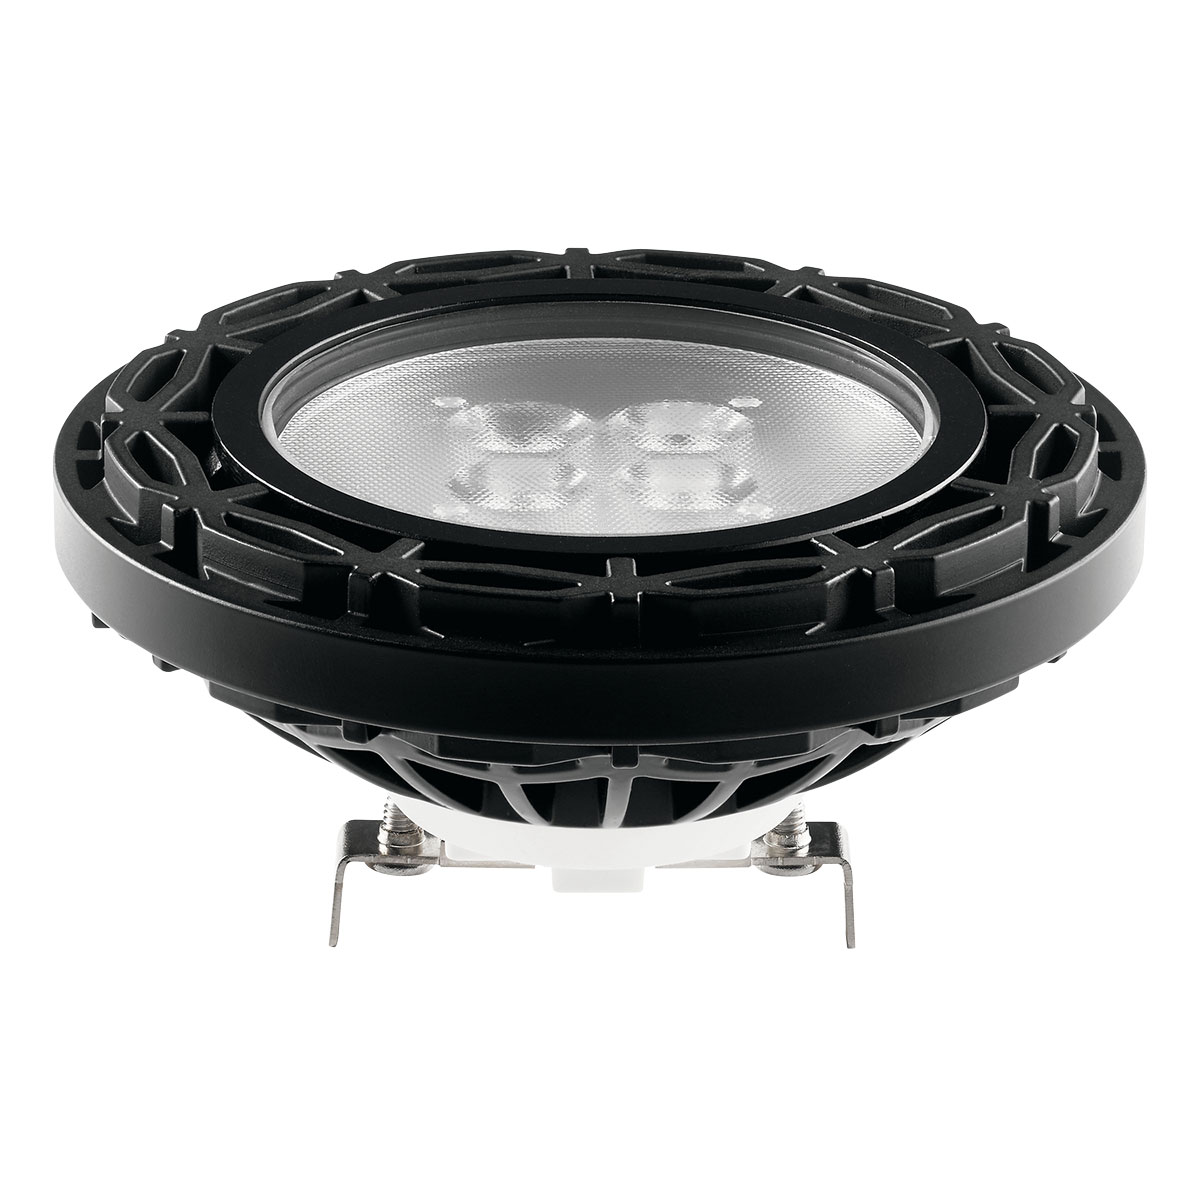 This wet location PAR36 12V LED lamp compares to the 35W Halogen. Featuring a 2700K warm white temperature, this lamp puts forth a 25-degree narrow flood beam spread angle.